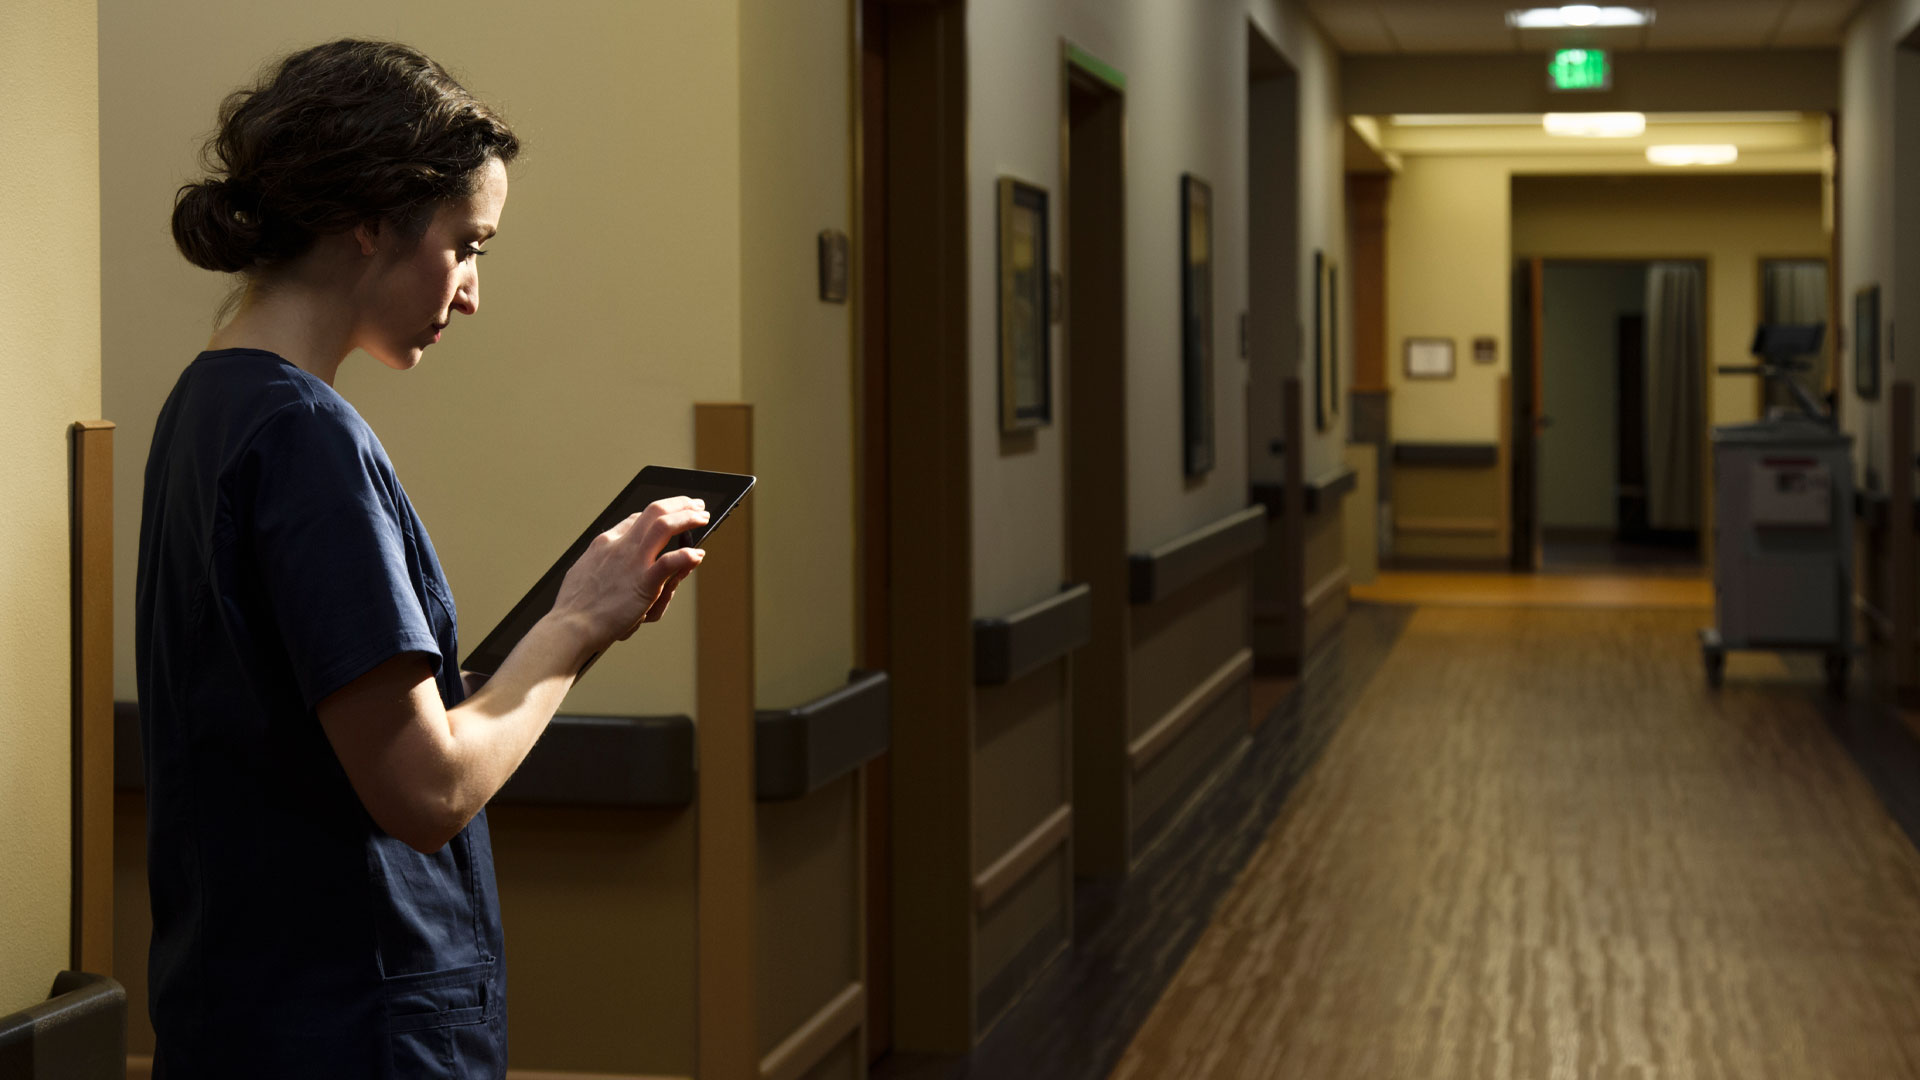 Nurse in scrubs working a night shift holding a tablet in the halls of a hospital.